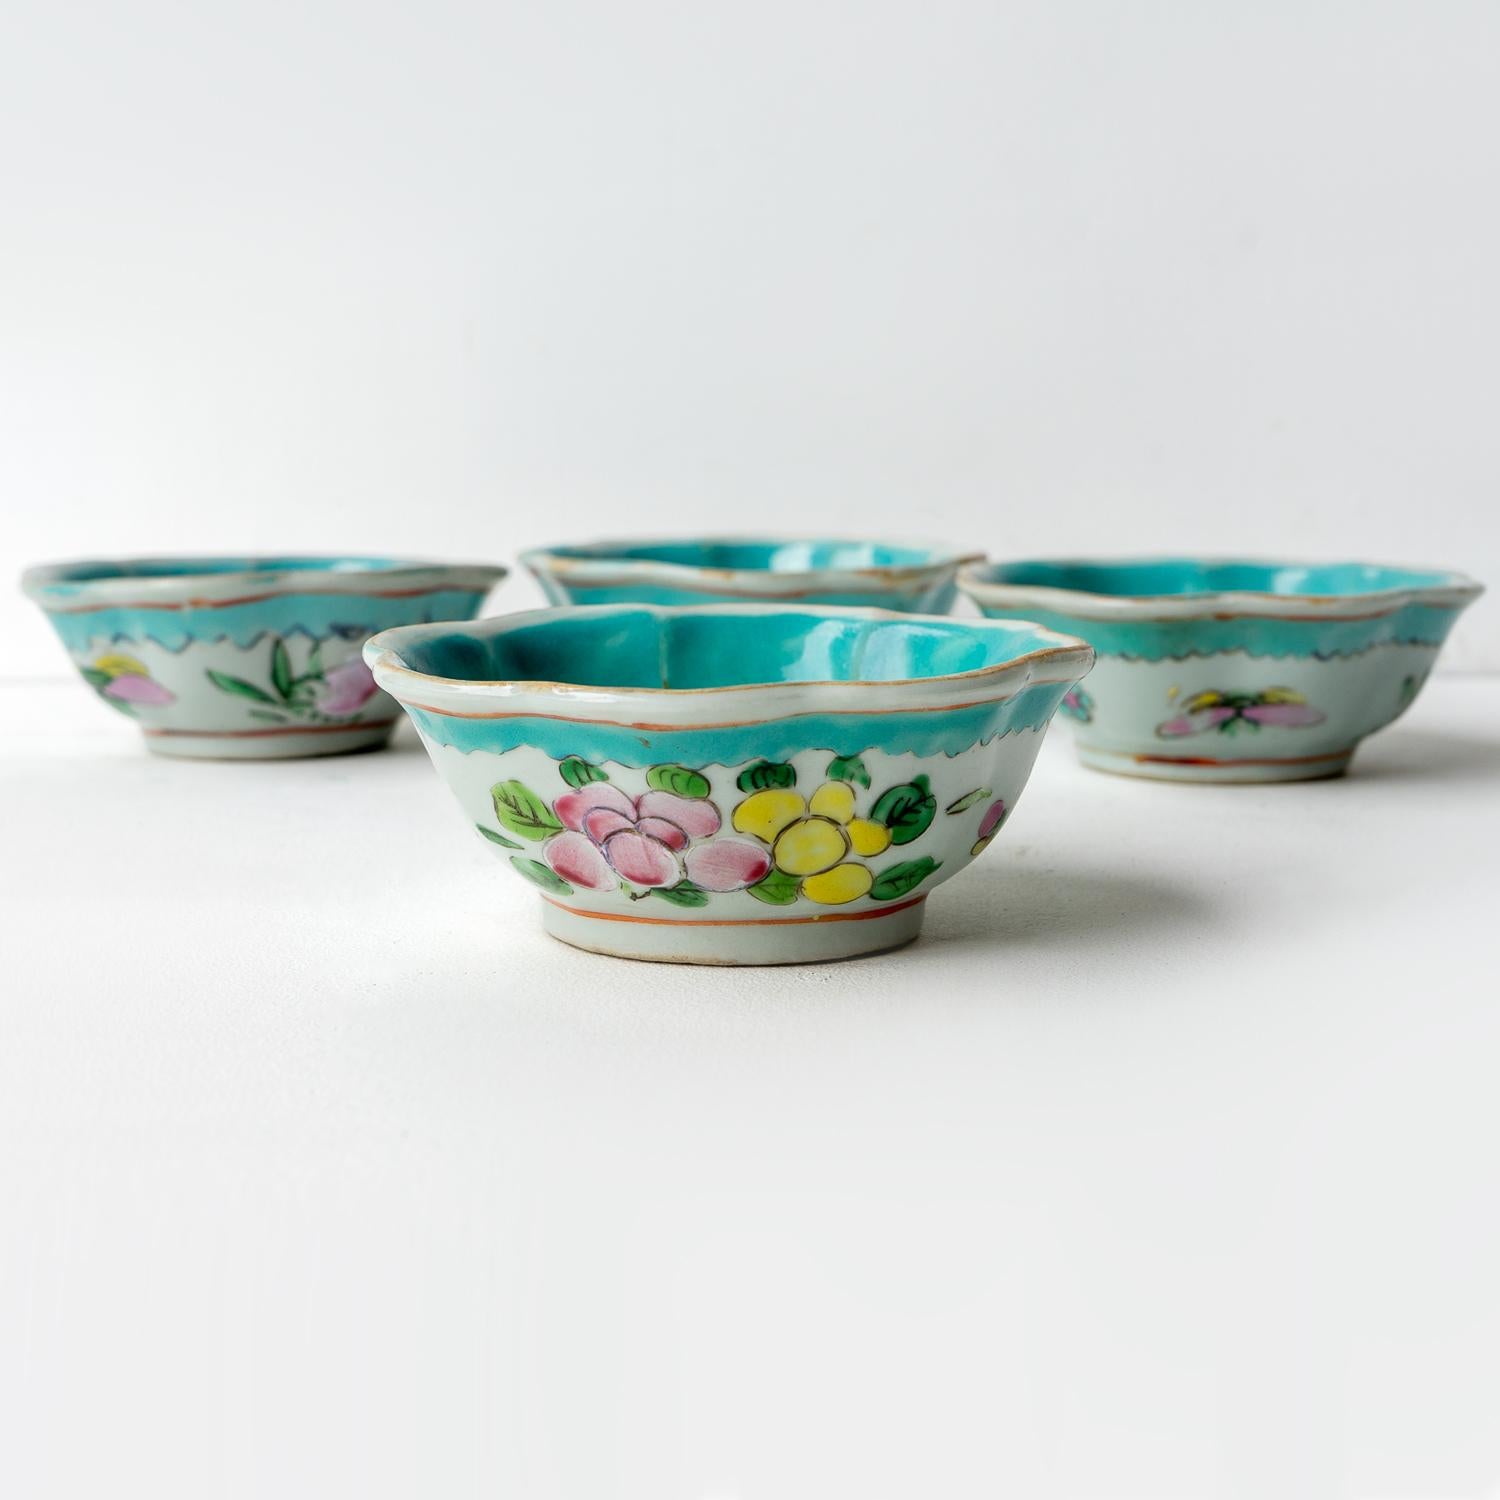 ANTIQUE BOWLS

SET OF FOUR ANTIQUE QING DYNASTY TURQUOISE GLAZE CHINESE PORCELAIN RICE BOWLS, 18TH/19TH CENTURY

Decoratively shaped scalloped edged porcelain bowls with an internal turquoise glaze and decorated with moths/butterflies and fruit in a